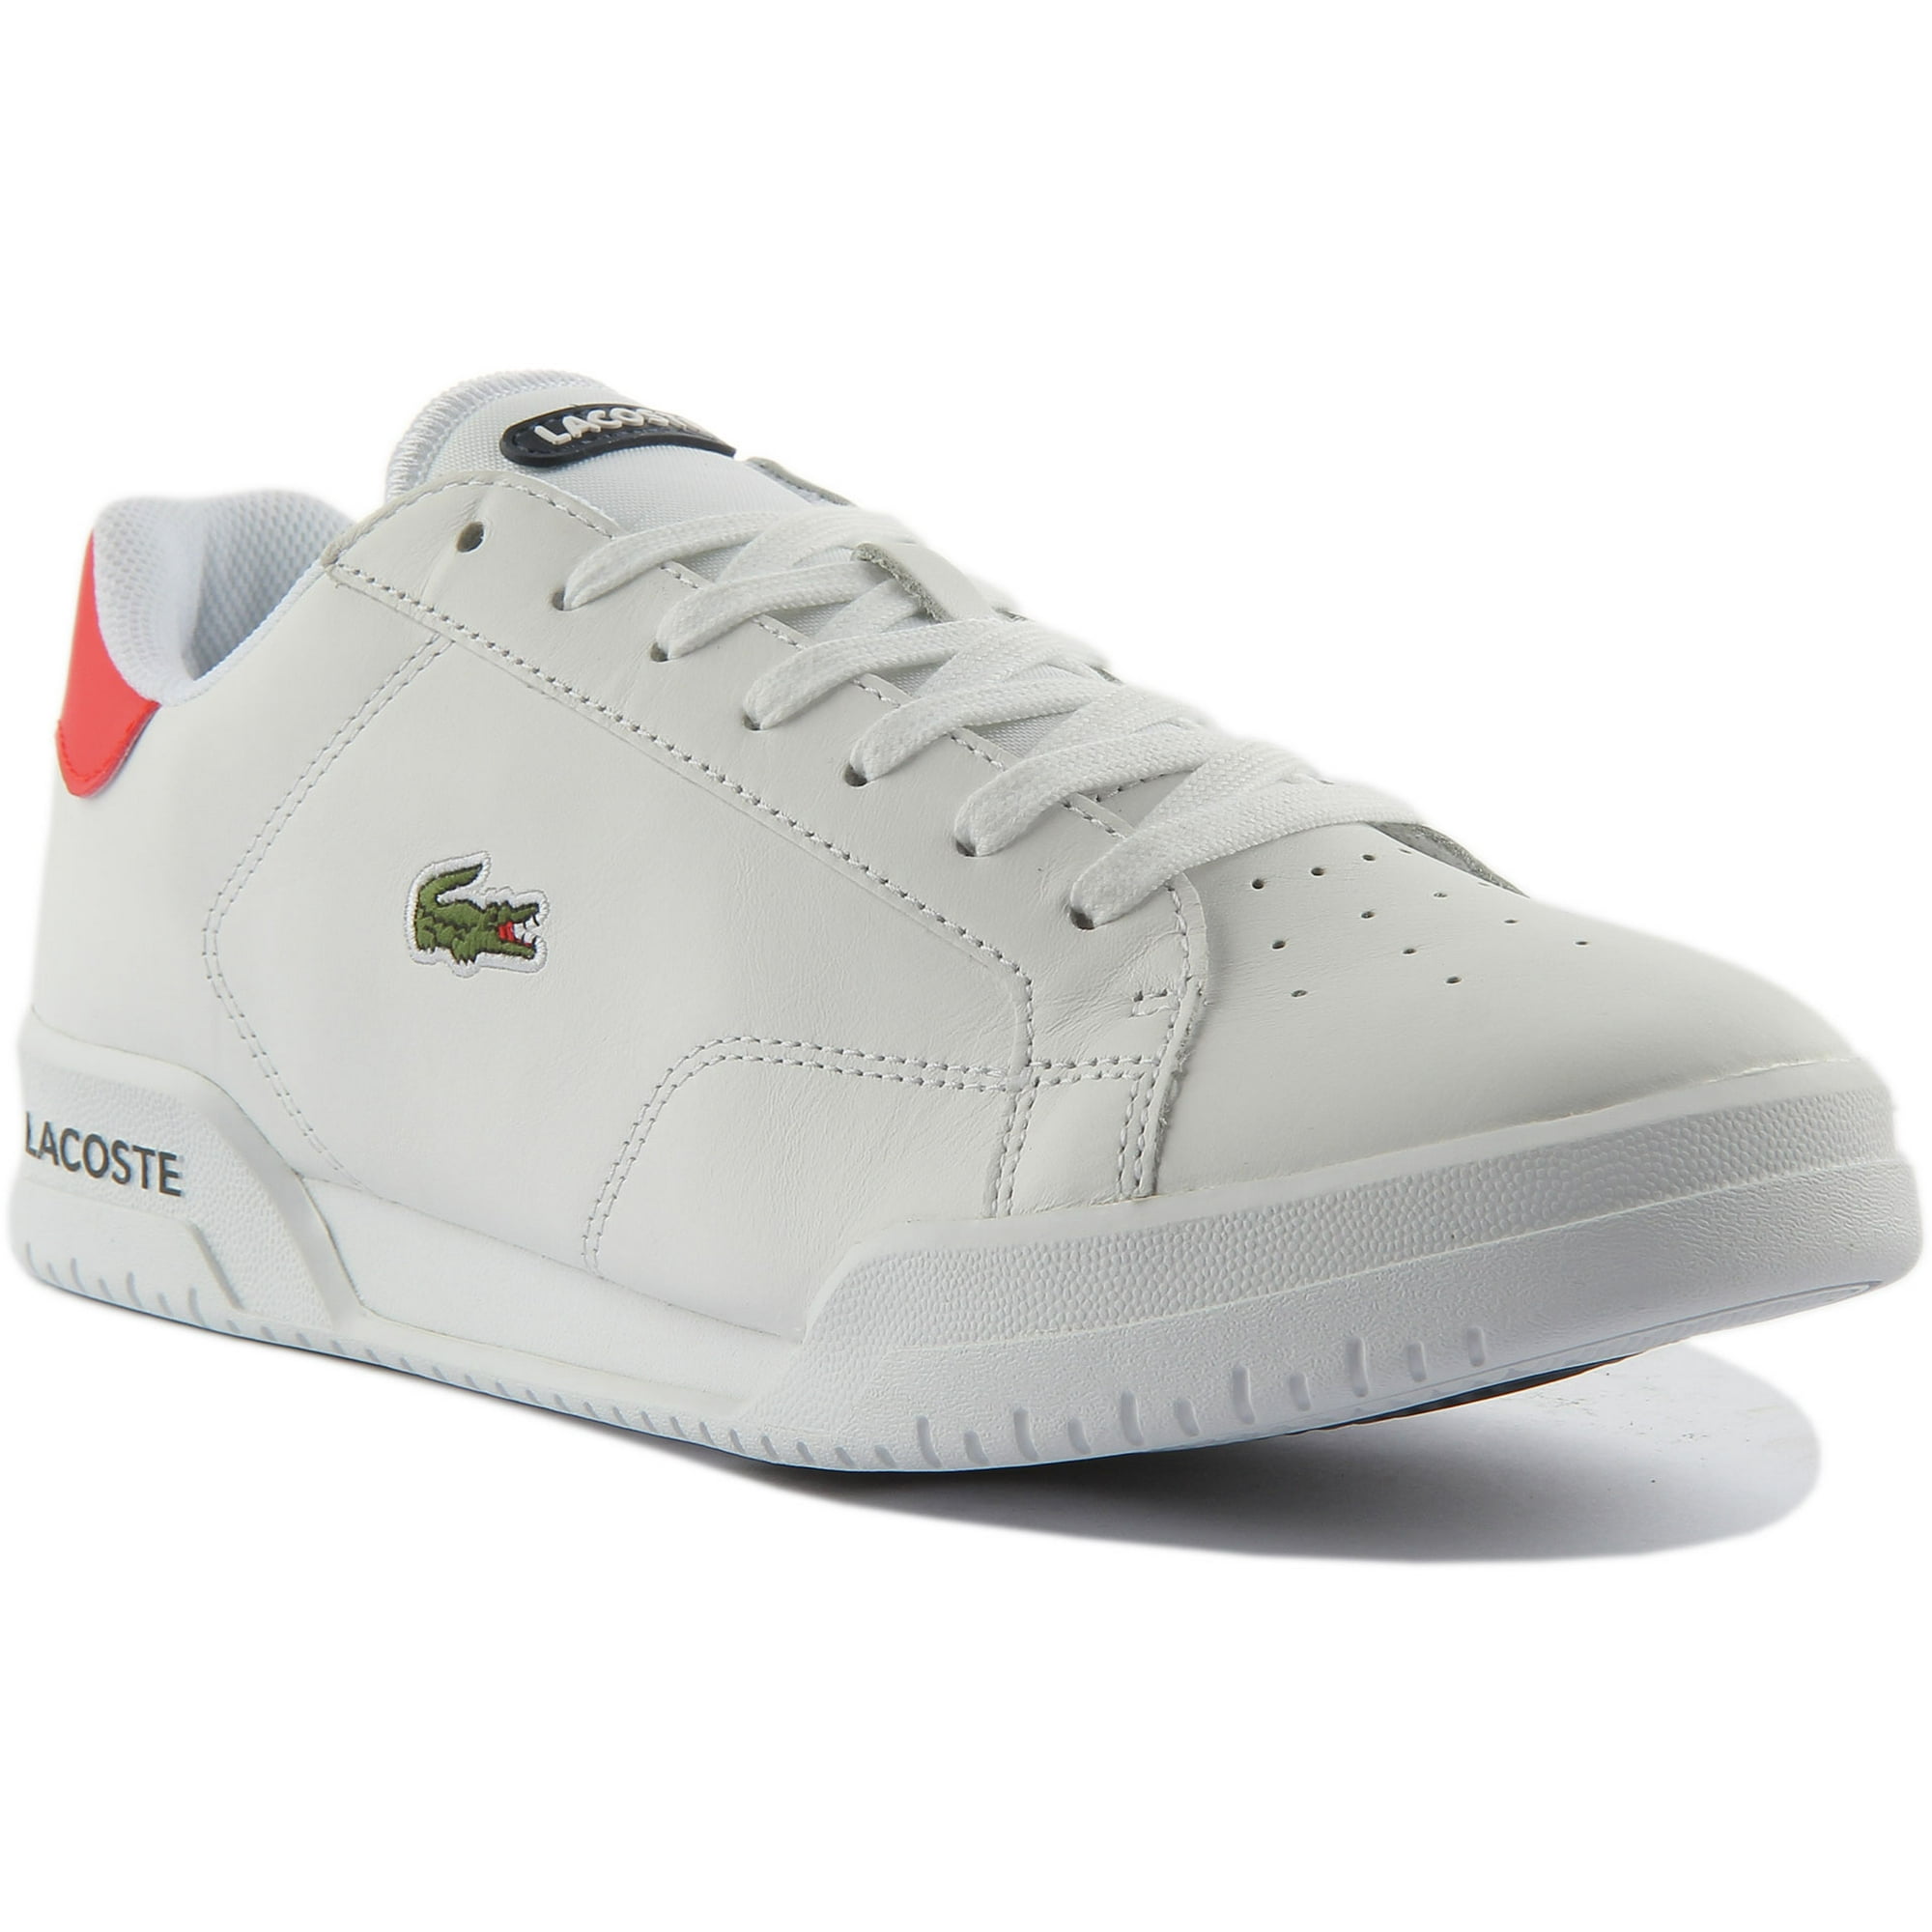 Lacoste Twin Serve Men's Lace Up Leather Shoes in White Red Size 8 - Walmart.com